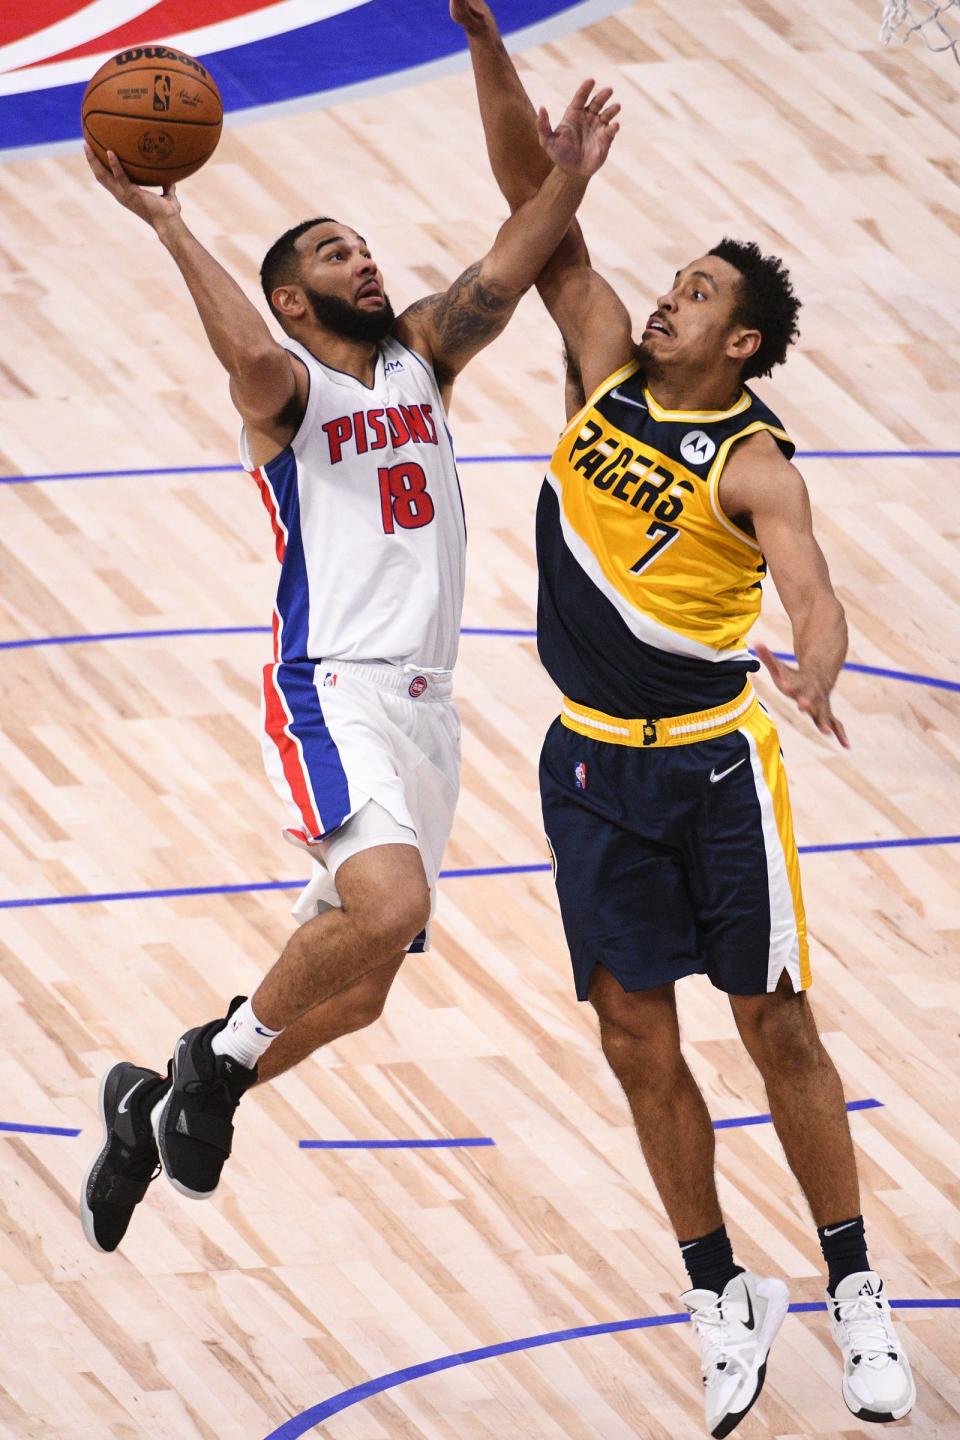 Pistons guard Cory Joseph (18) goes to the basket as Indiana Pacers guard Malcolm Brogdon (7) defends during the third quarter on Nov. 17, 2021, at Little Caesars Arena in Detroit.